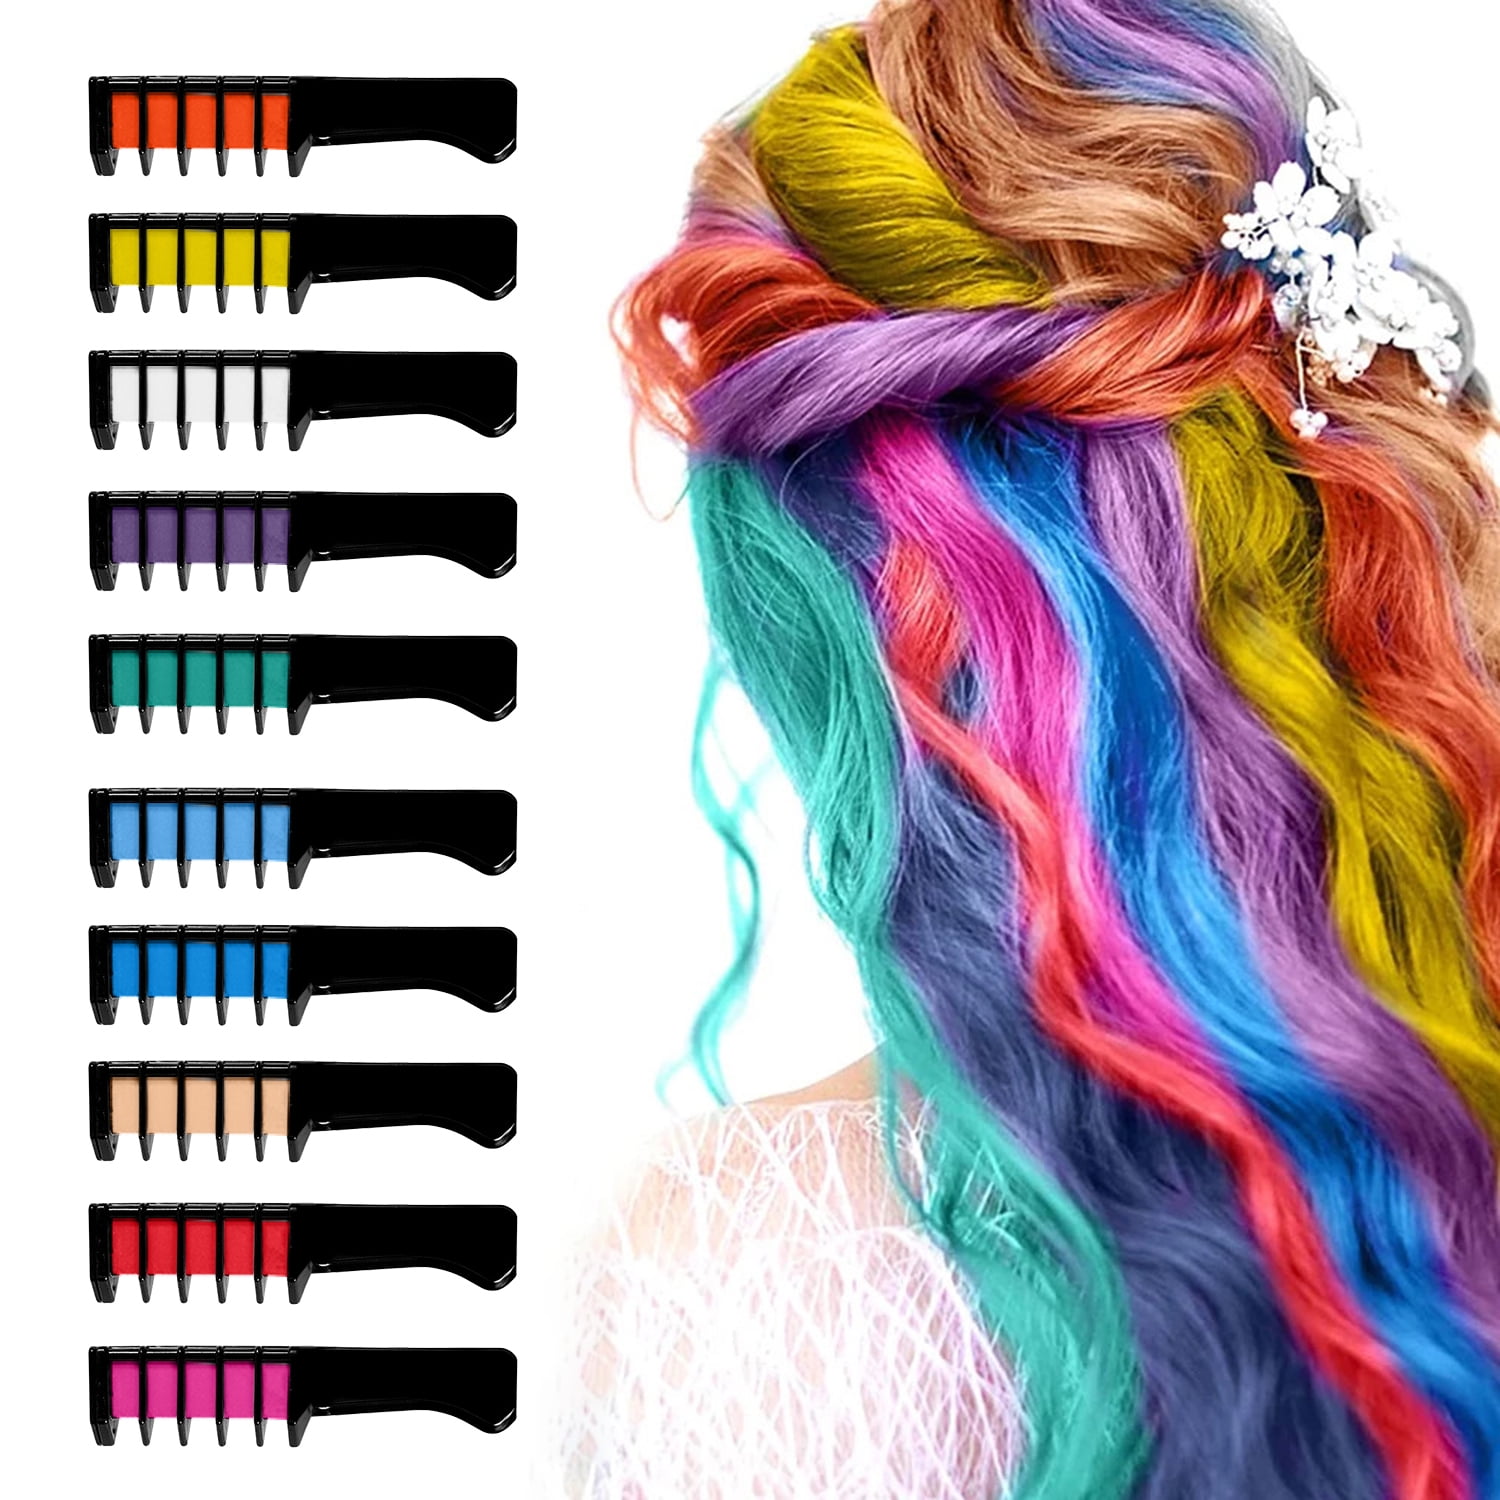 12 Colors Mini Temporary Hair Chalk Set Washable Hair Chalk Dye Non Toxic  Hair Color For Kids Age 4 5 6 7 8 9 10 11 Birthday Christmas Gifts